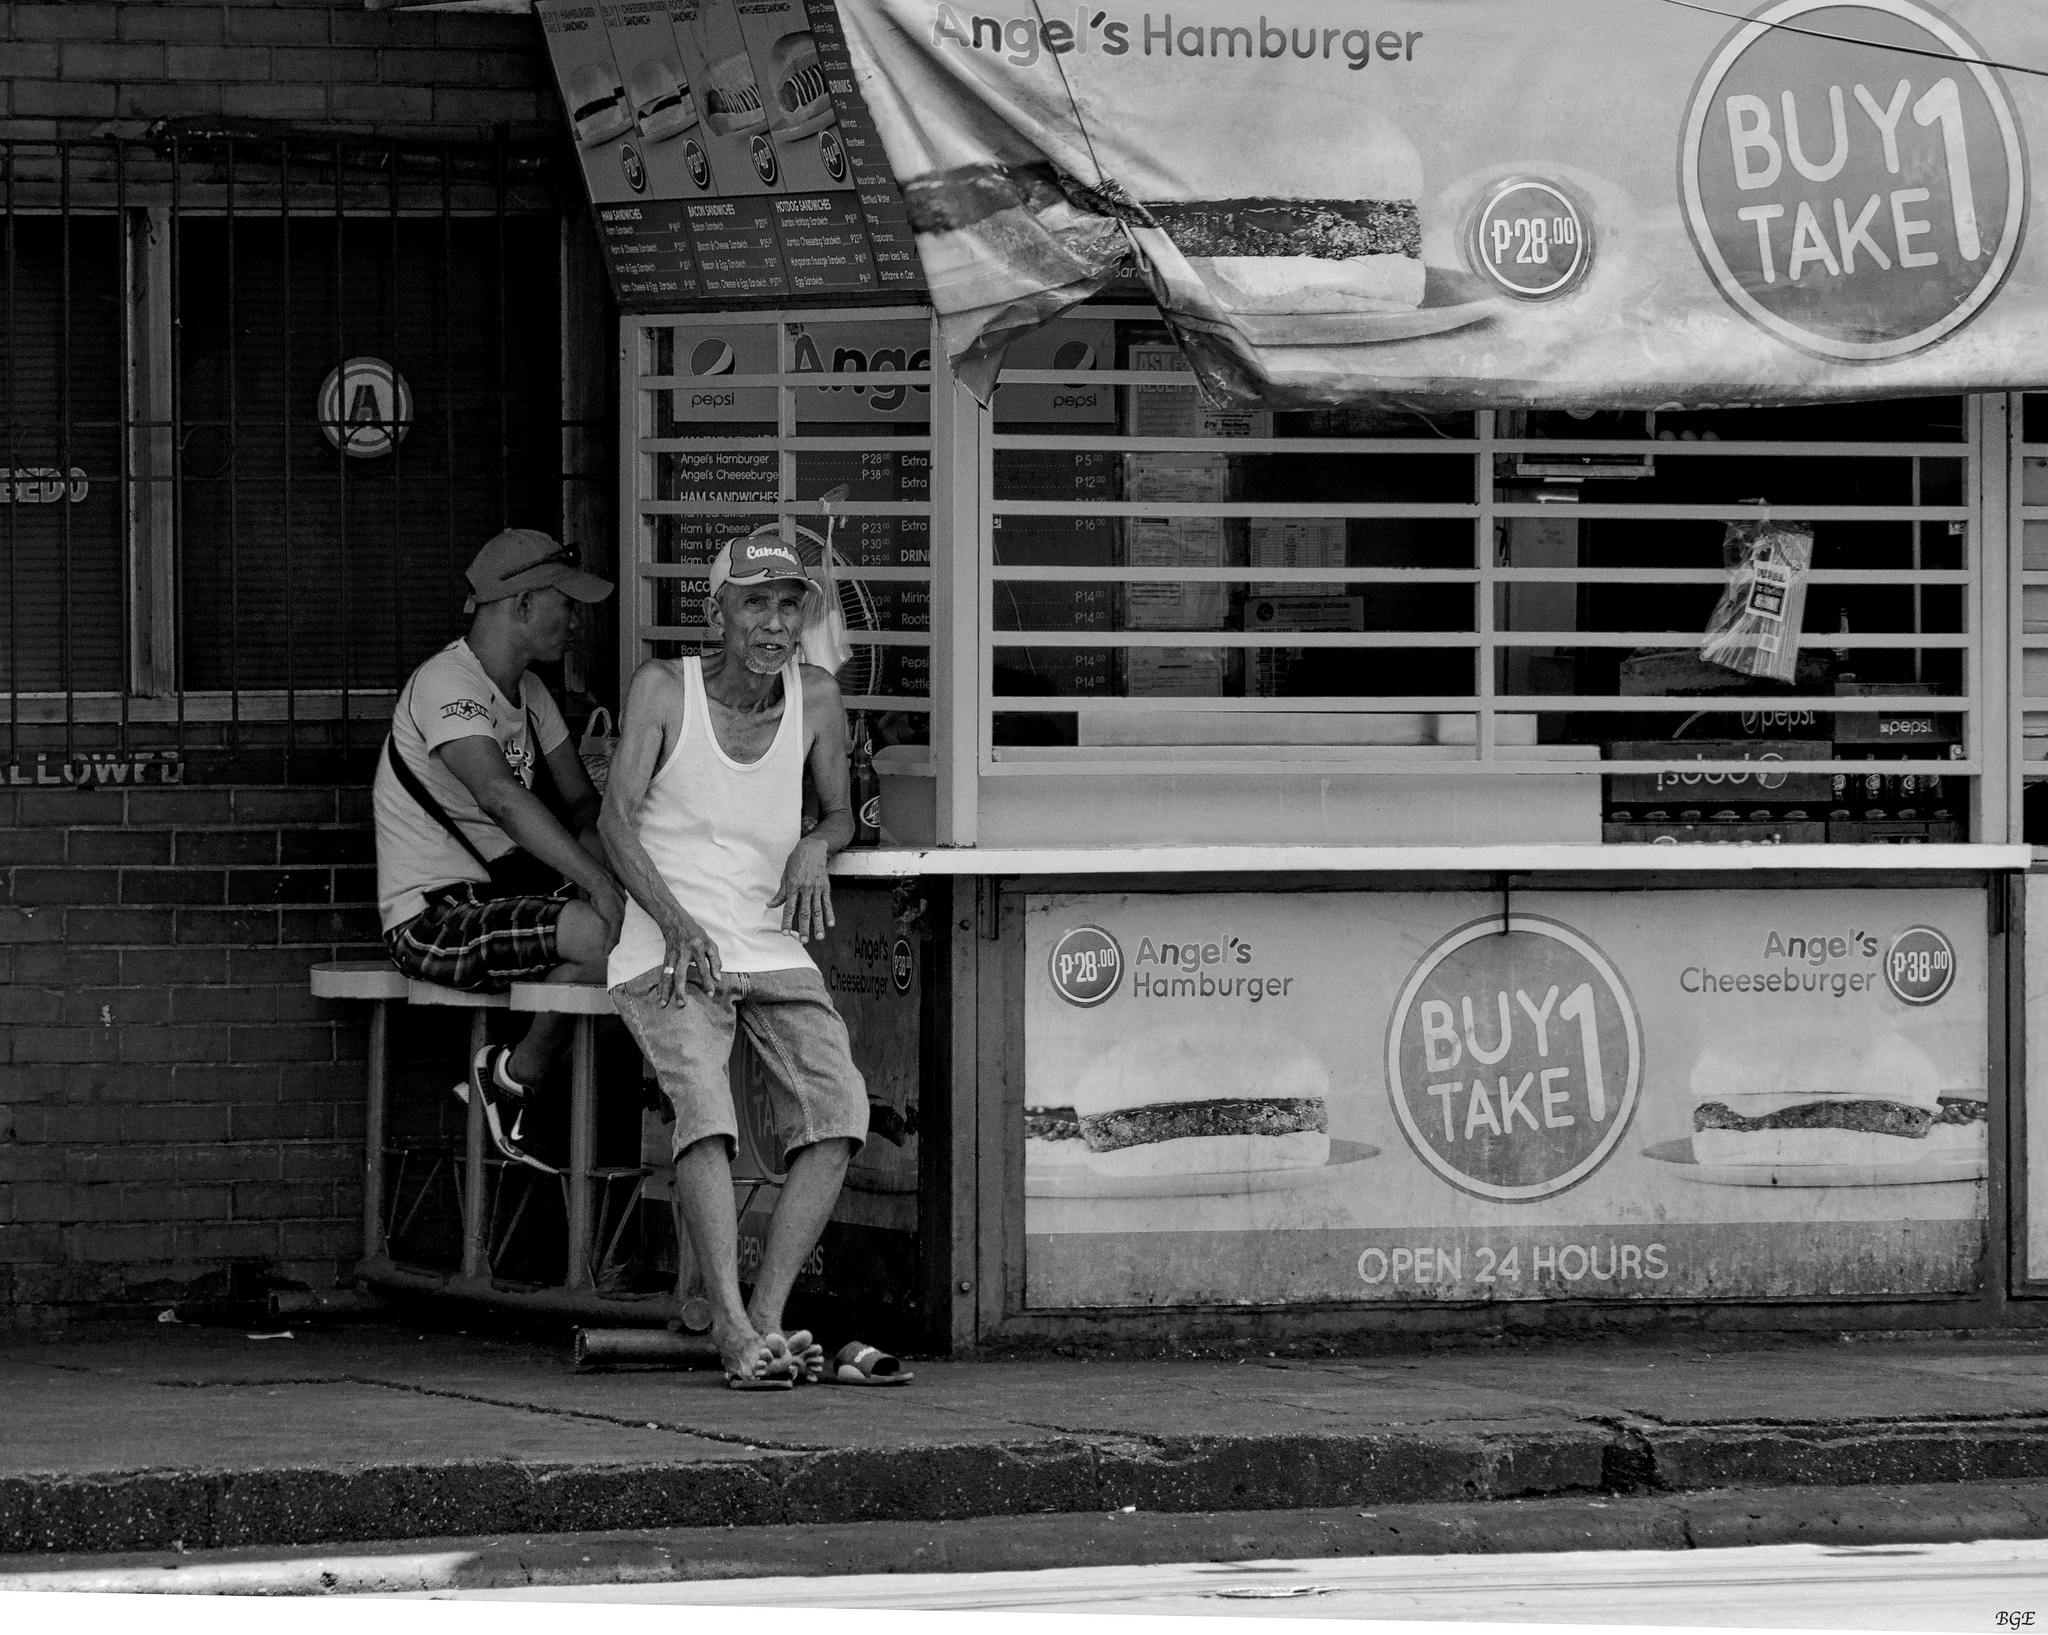 Two old men sitting by a hamburger stand on a street corner, published to "3 Tips for Setting Up Your Small Business Website for Success"